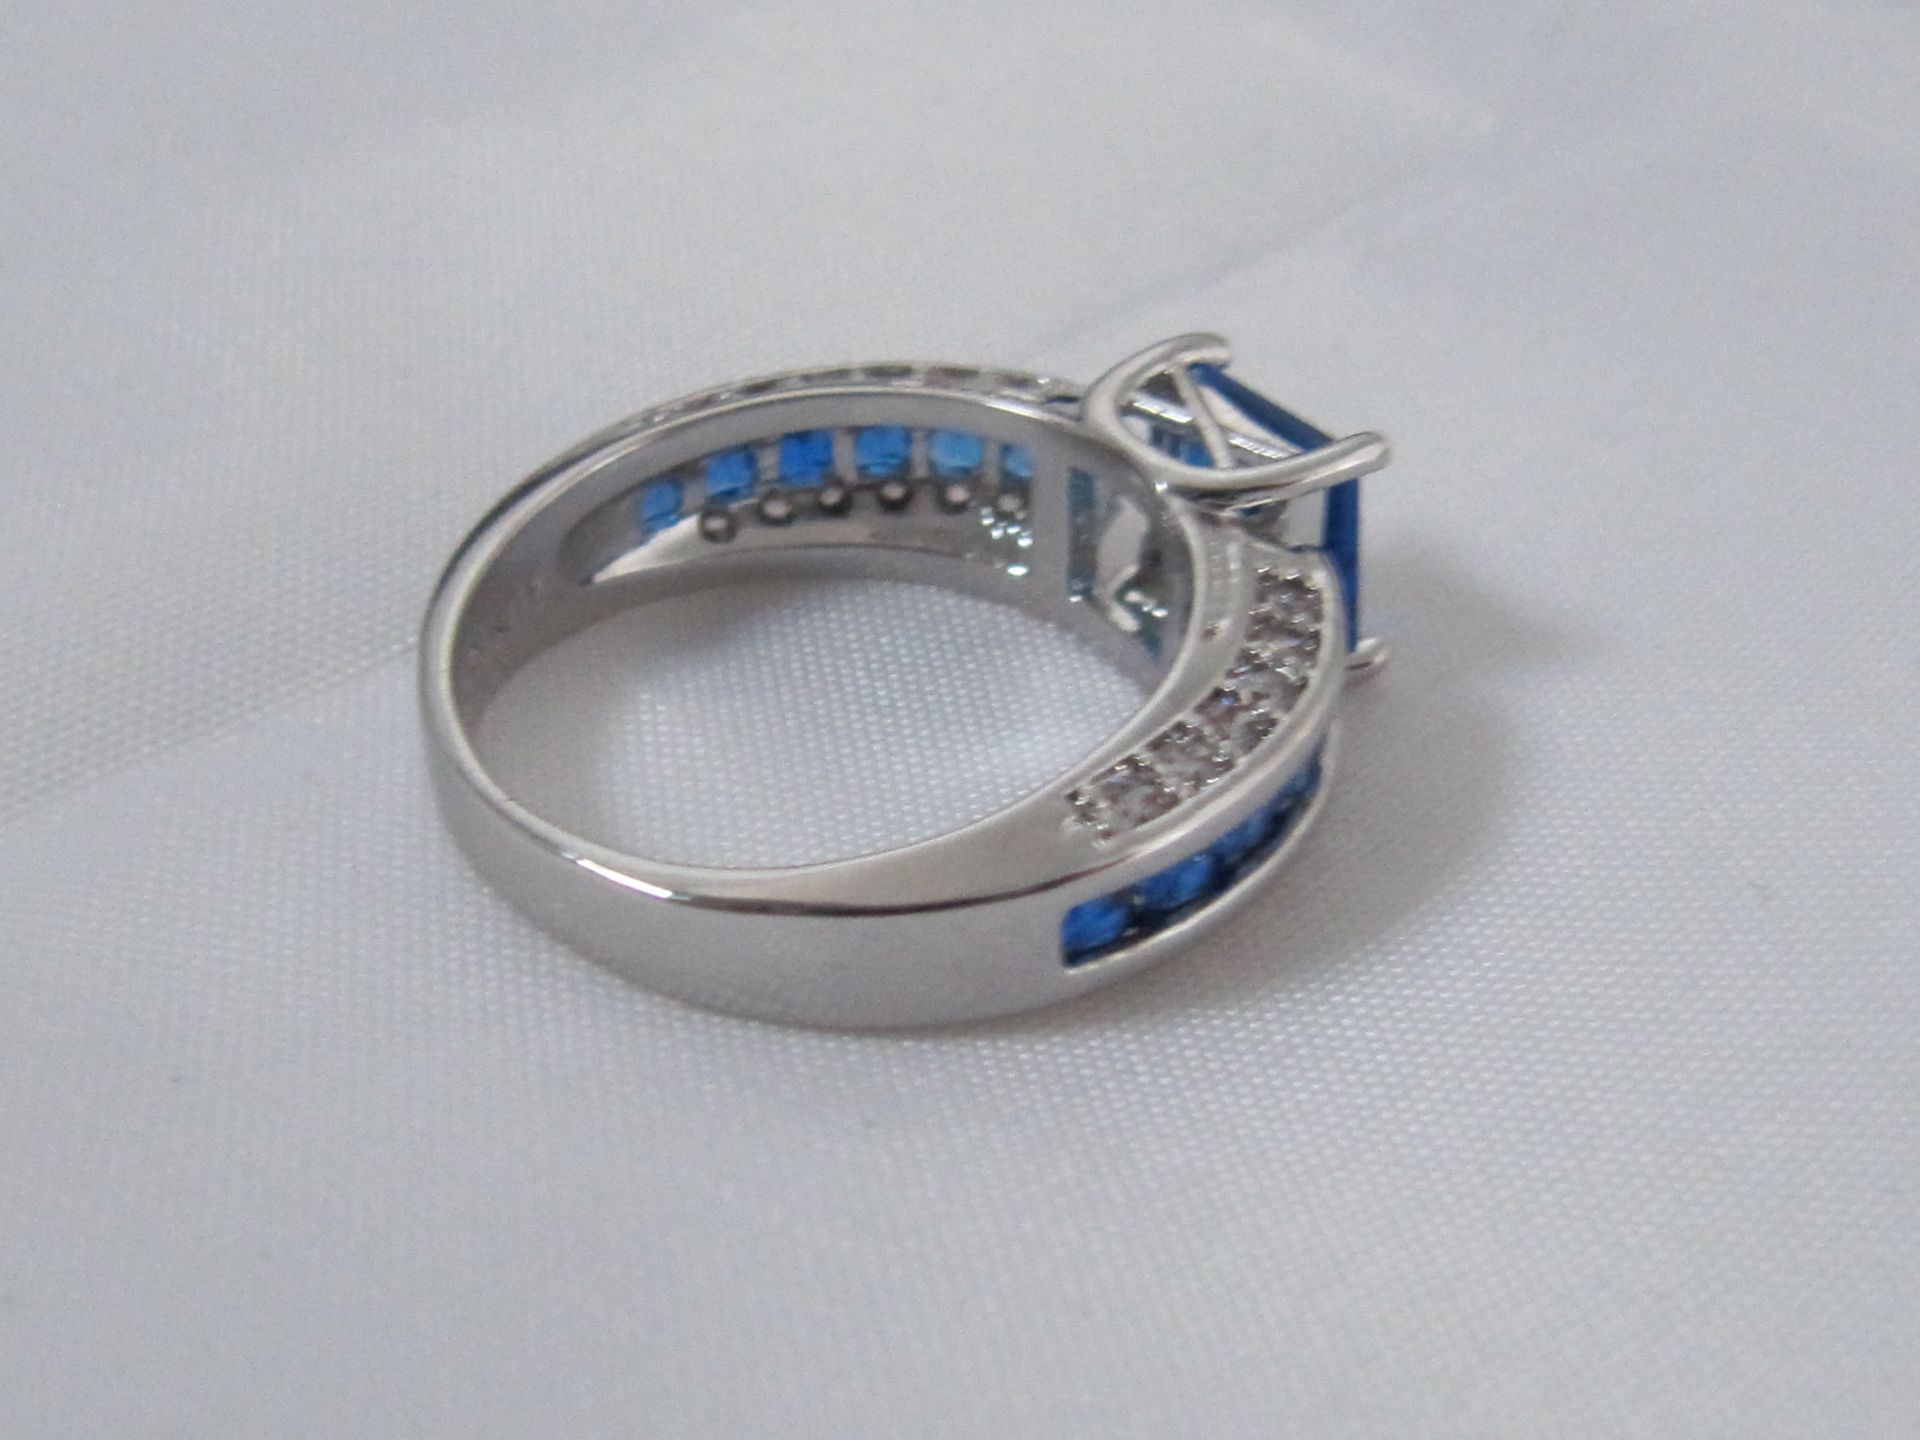 10k White Gold Filled with Blue Sapphires. Size R. - Image 4 of 5